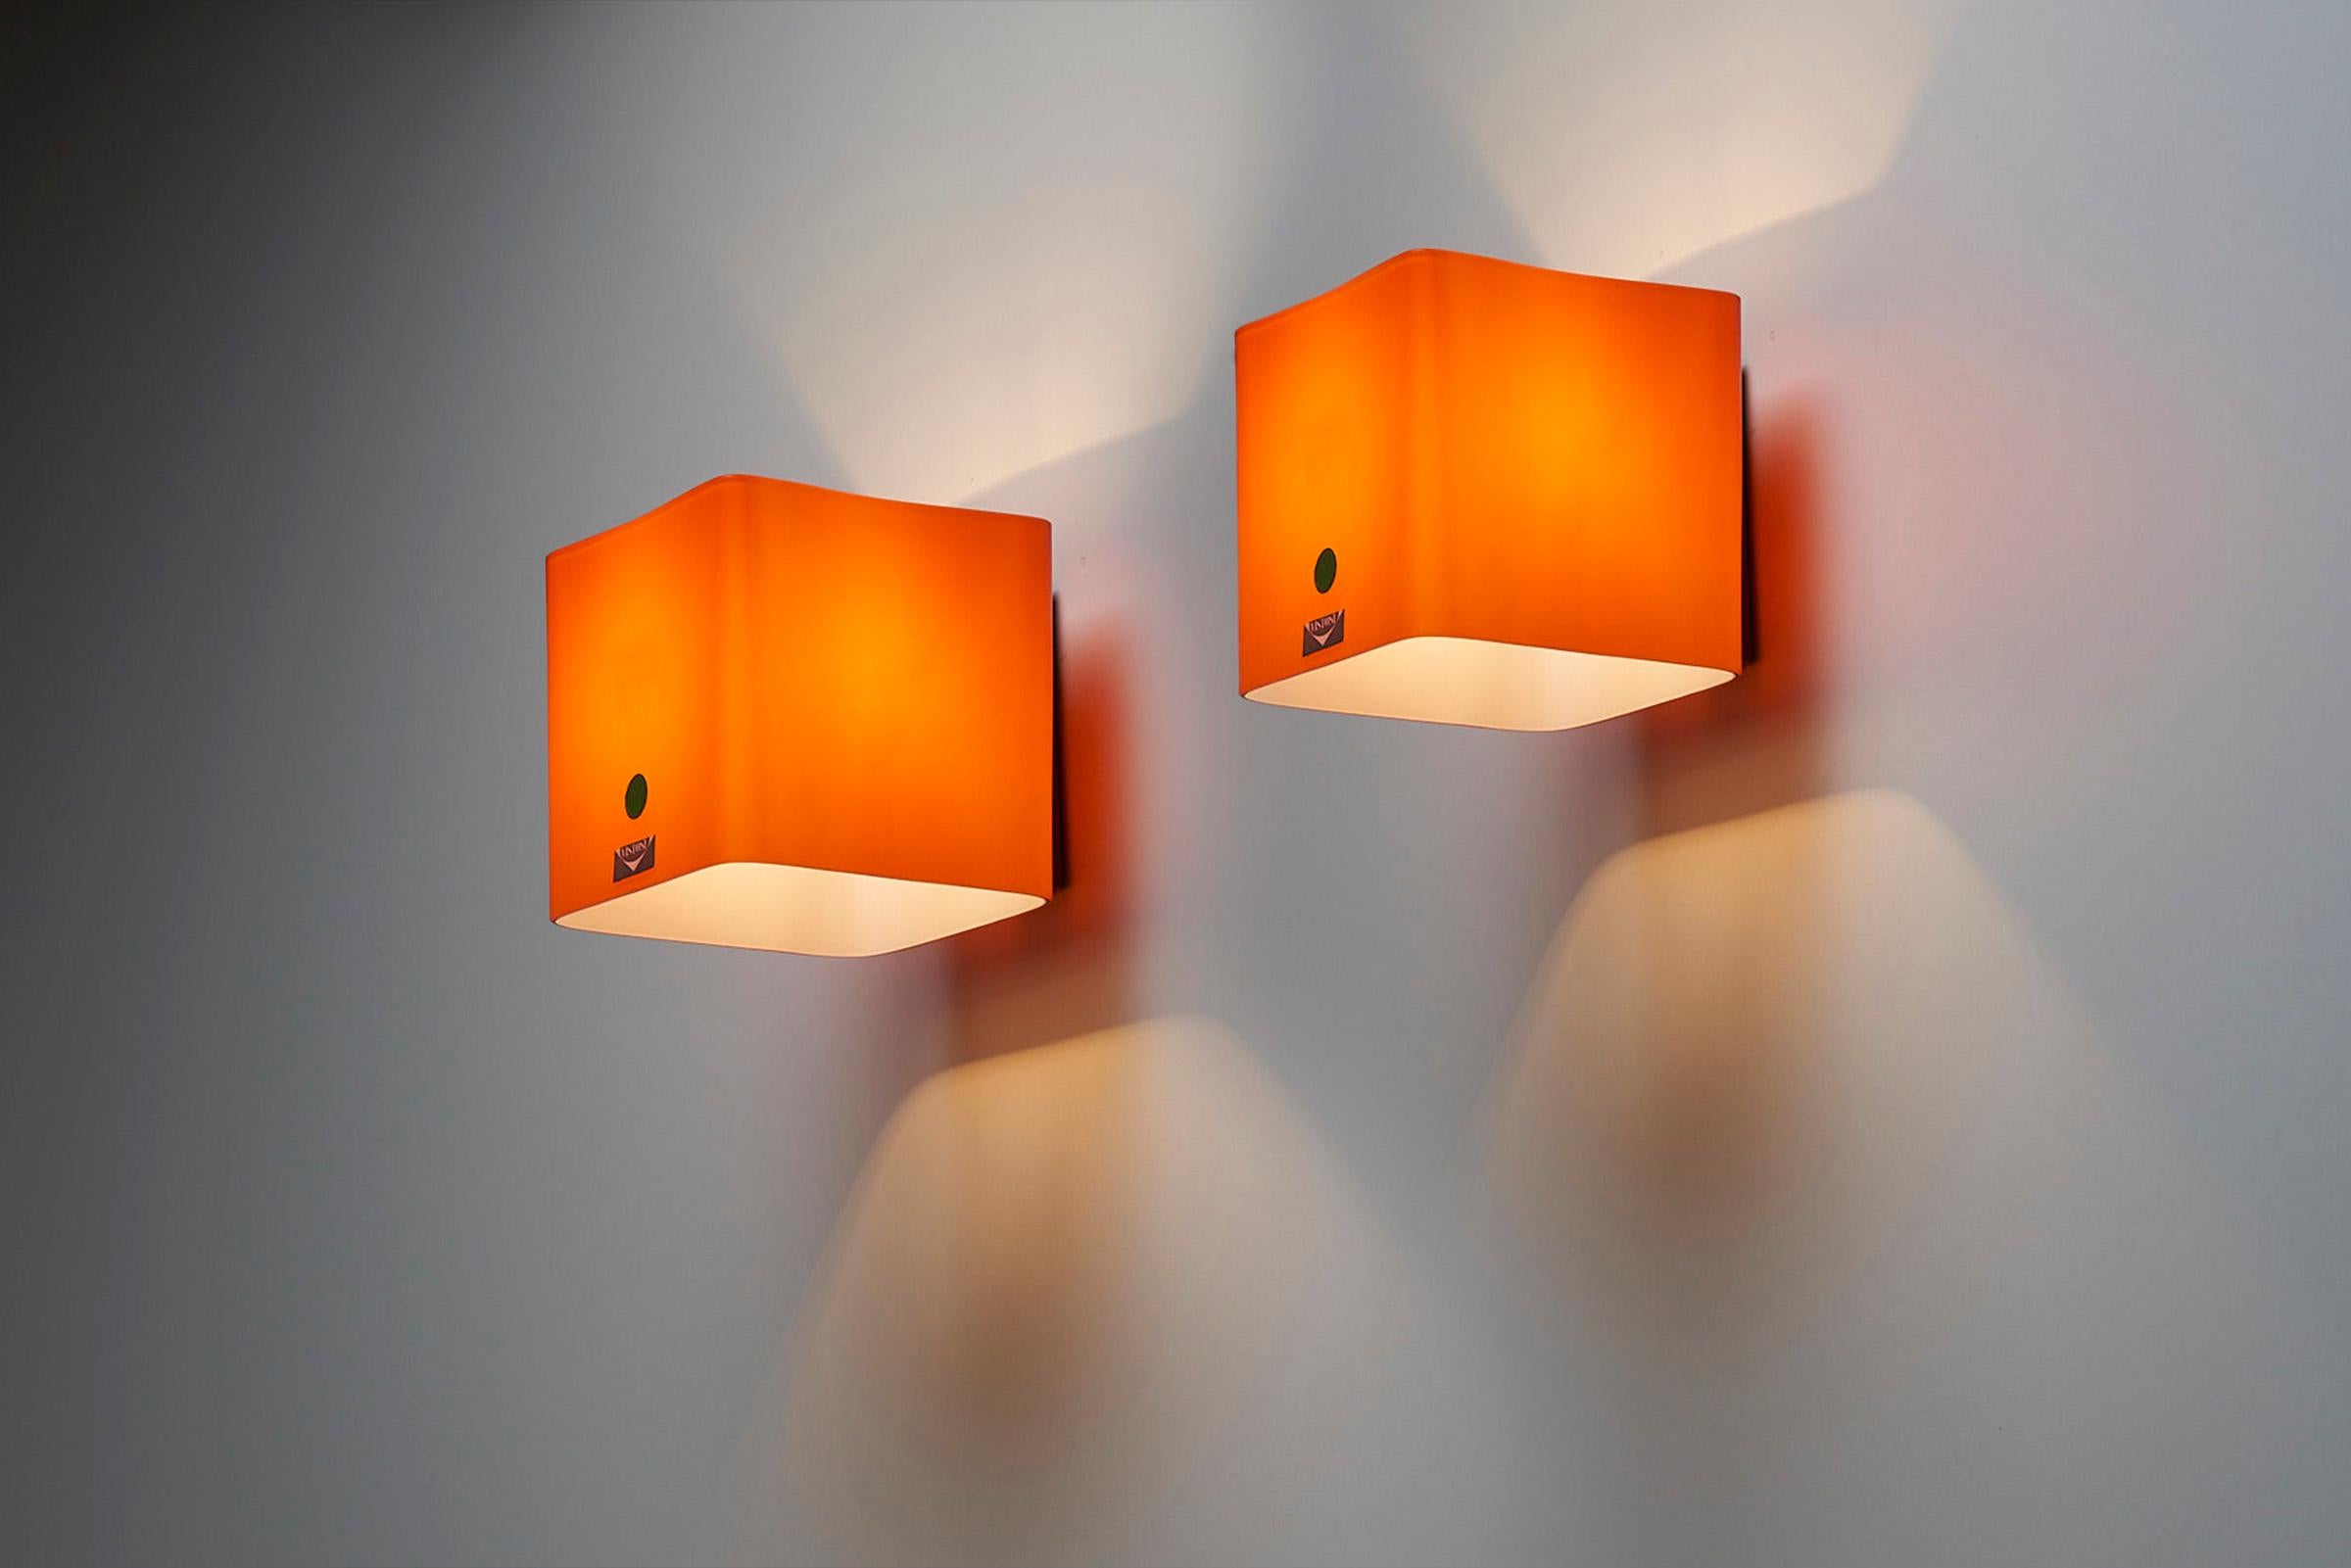 Introducing a captivating set of 2 Orange Murano Glass Wall Sconces, showcasing the exquisite craftsmanship of Vistosi Italy.

These wall sconces embody the perfect fusion of artistry and functionality, with their kubic form and vibrant orange